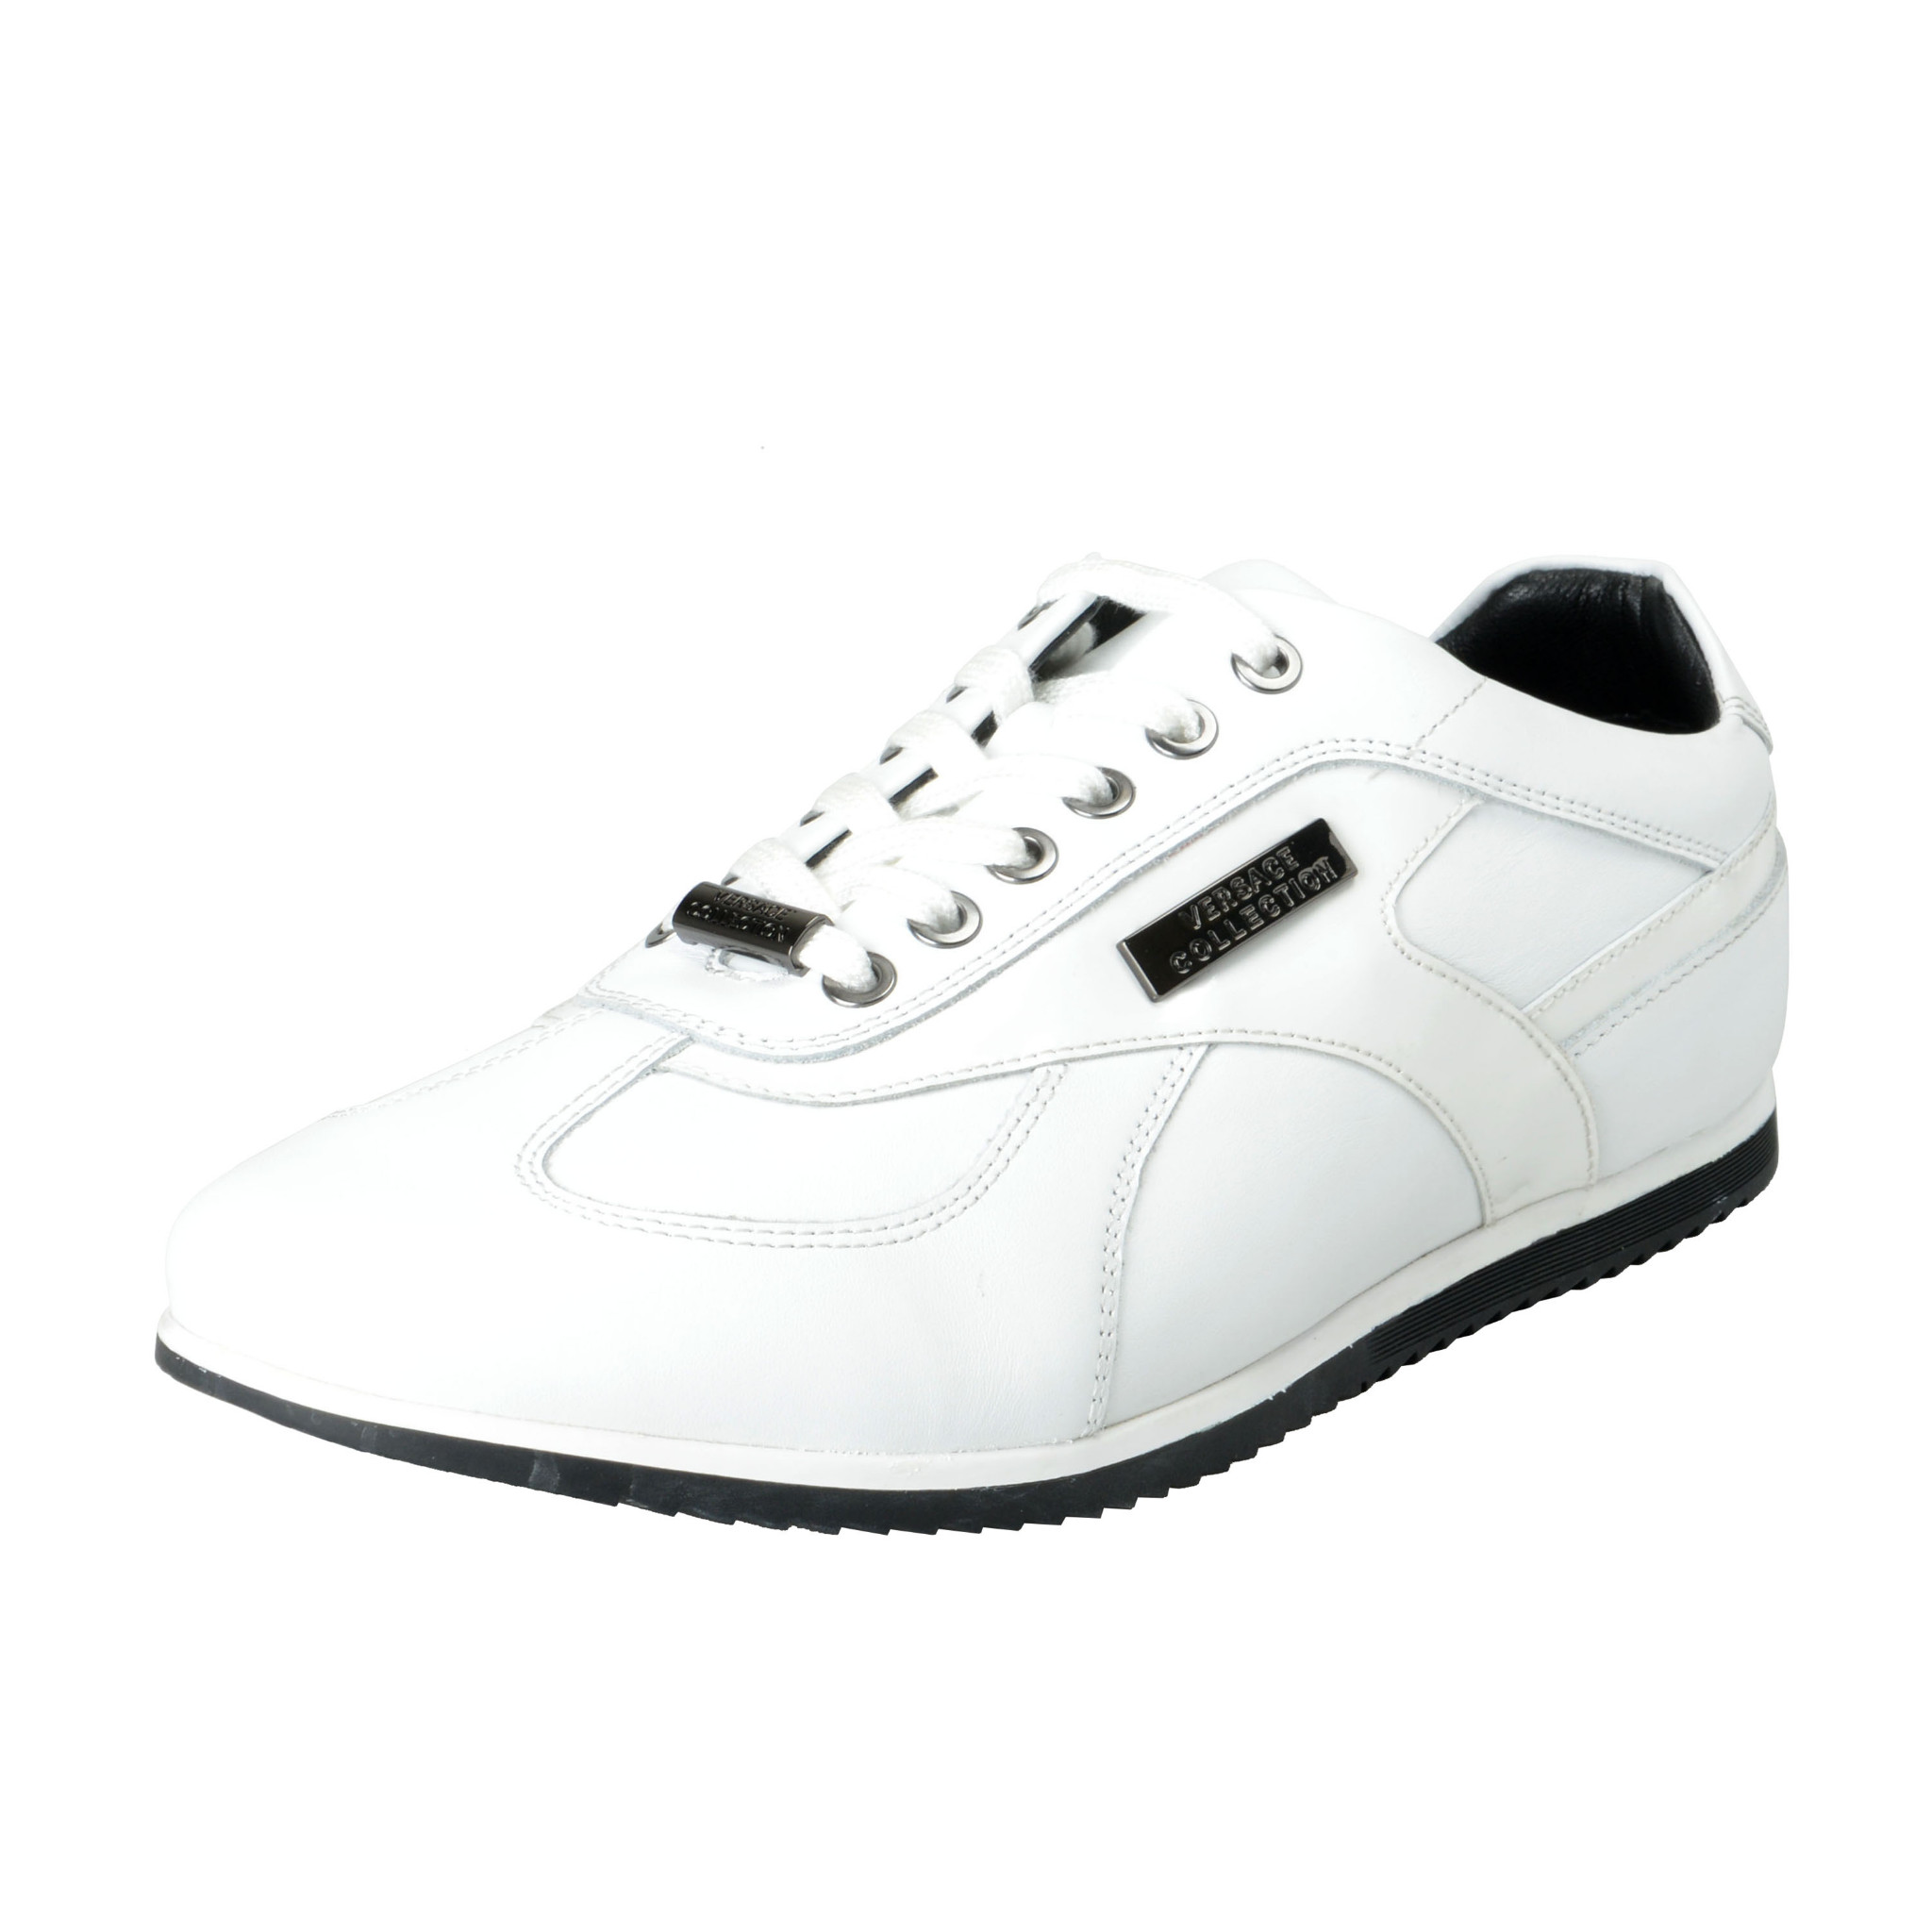 versace collection white shoes